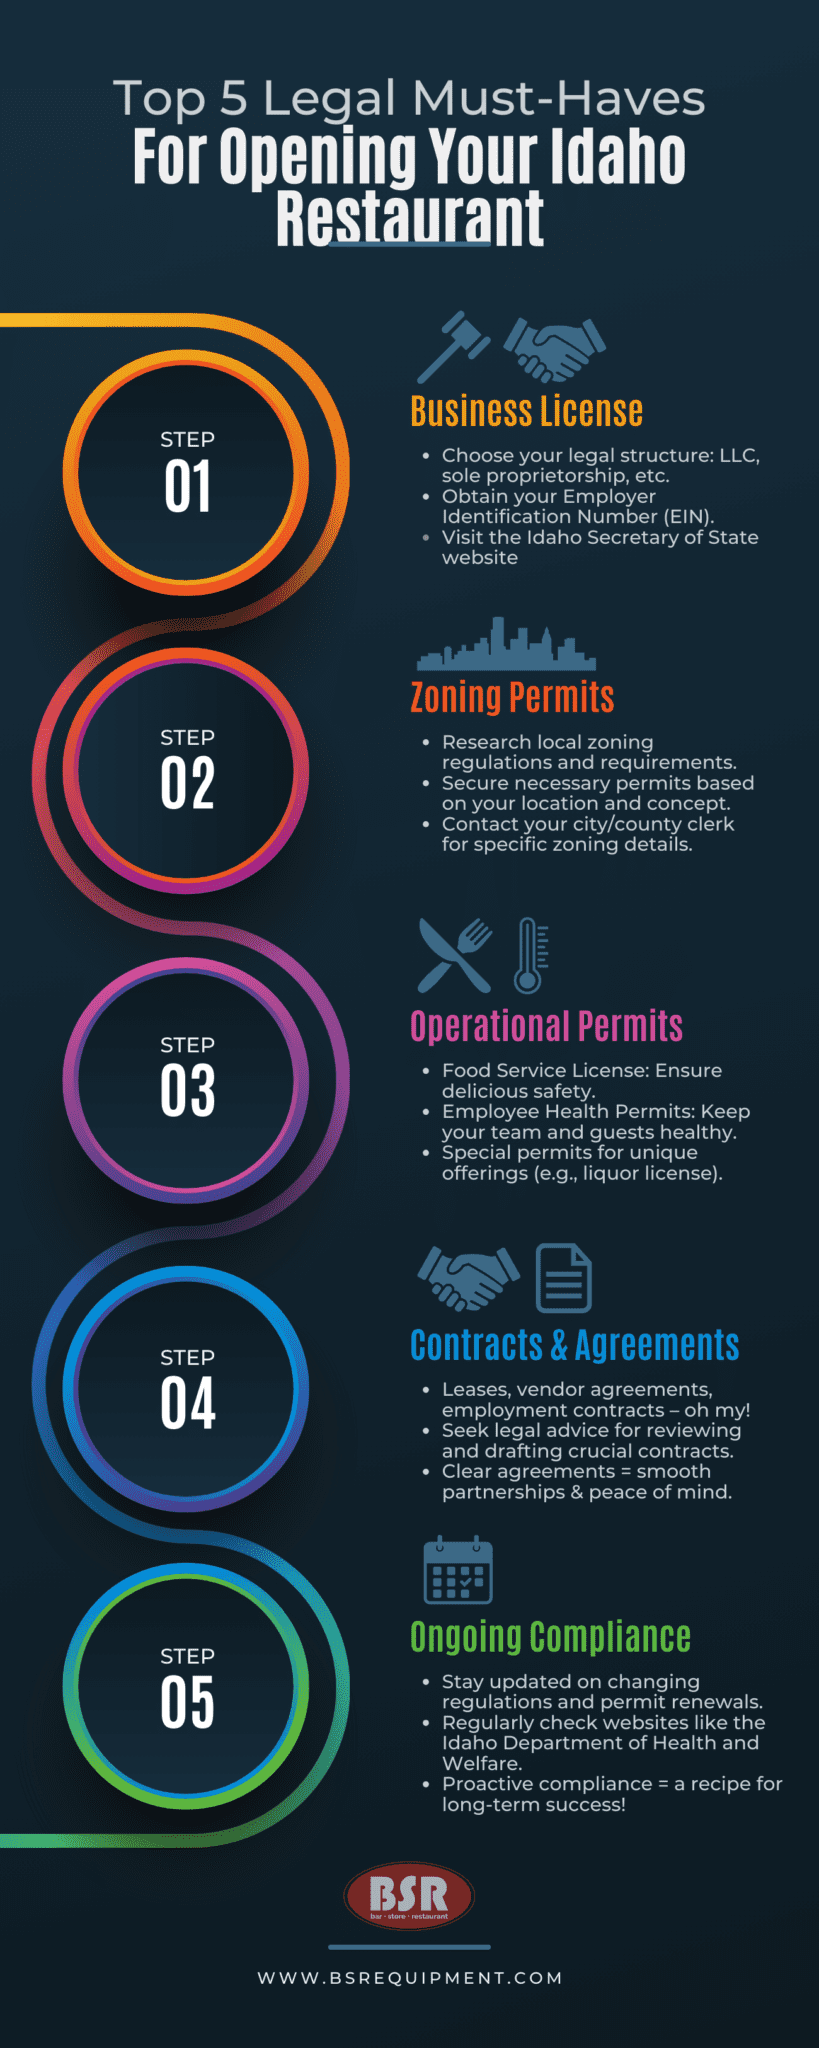 Infographic illustrating the five key legal steps for starting a restaurant in Idaho, including business licensing, zoning permits, operational permits, contracts and agreements, and health and safety regulations.